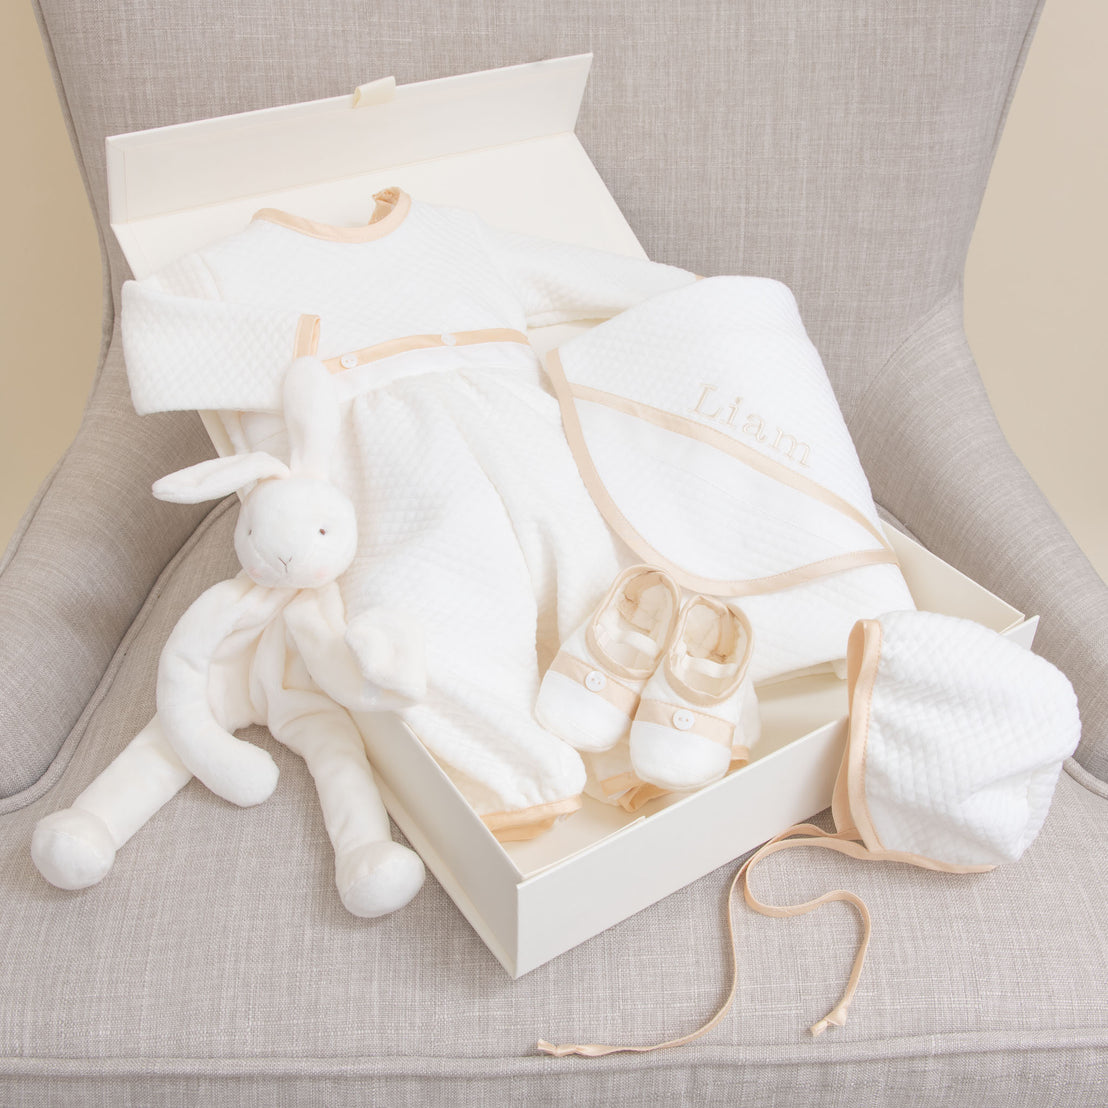 Contents of the Liam Newborn Romper Gift Box Set, including Romper, Bonnet, Booties, Bunny, and Blanket (Personalization Optional)